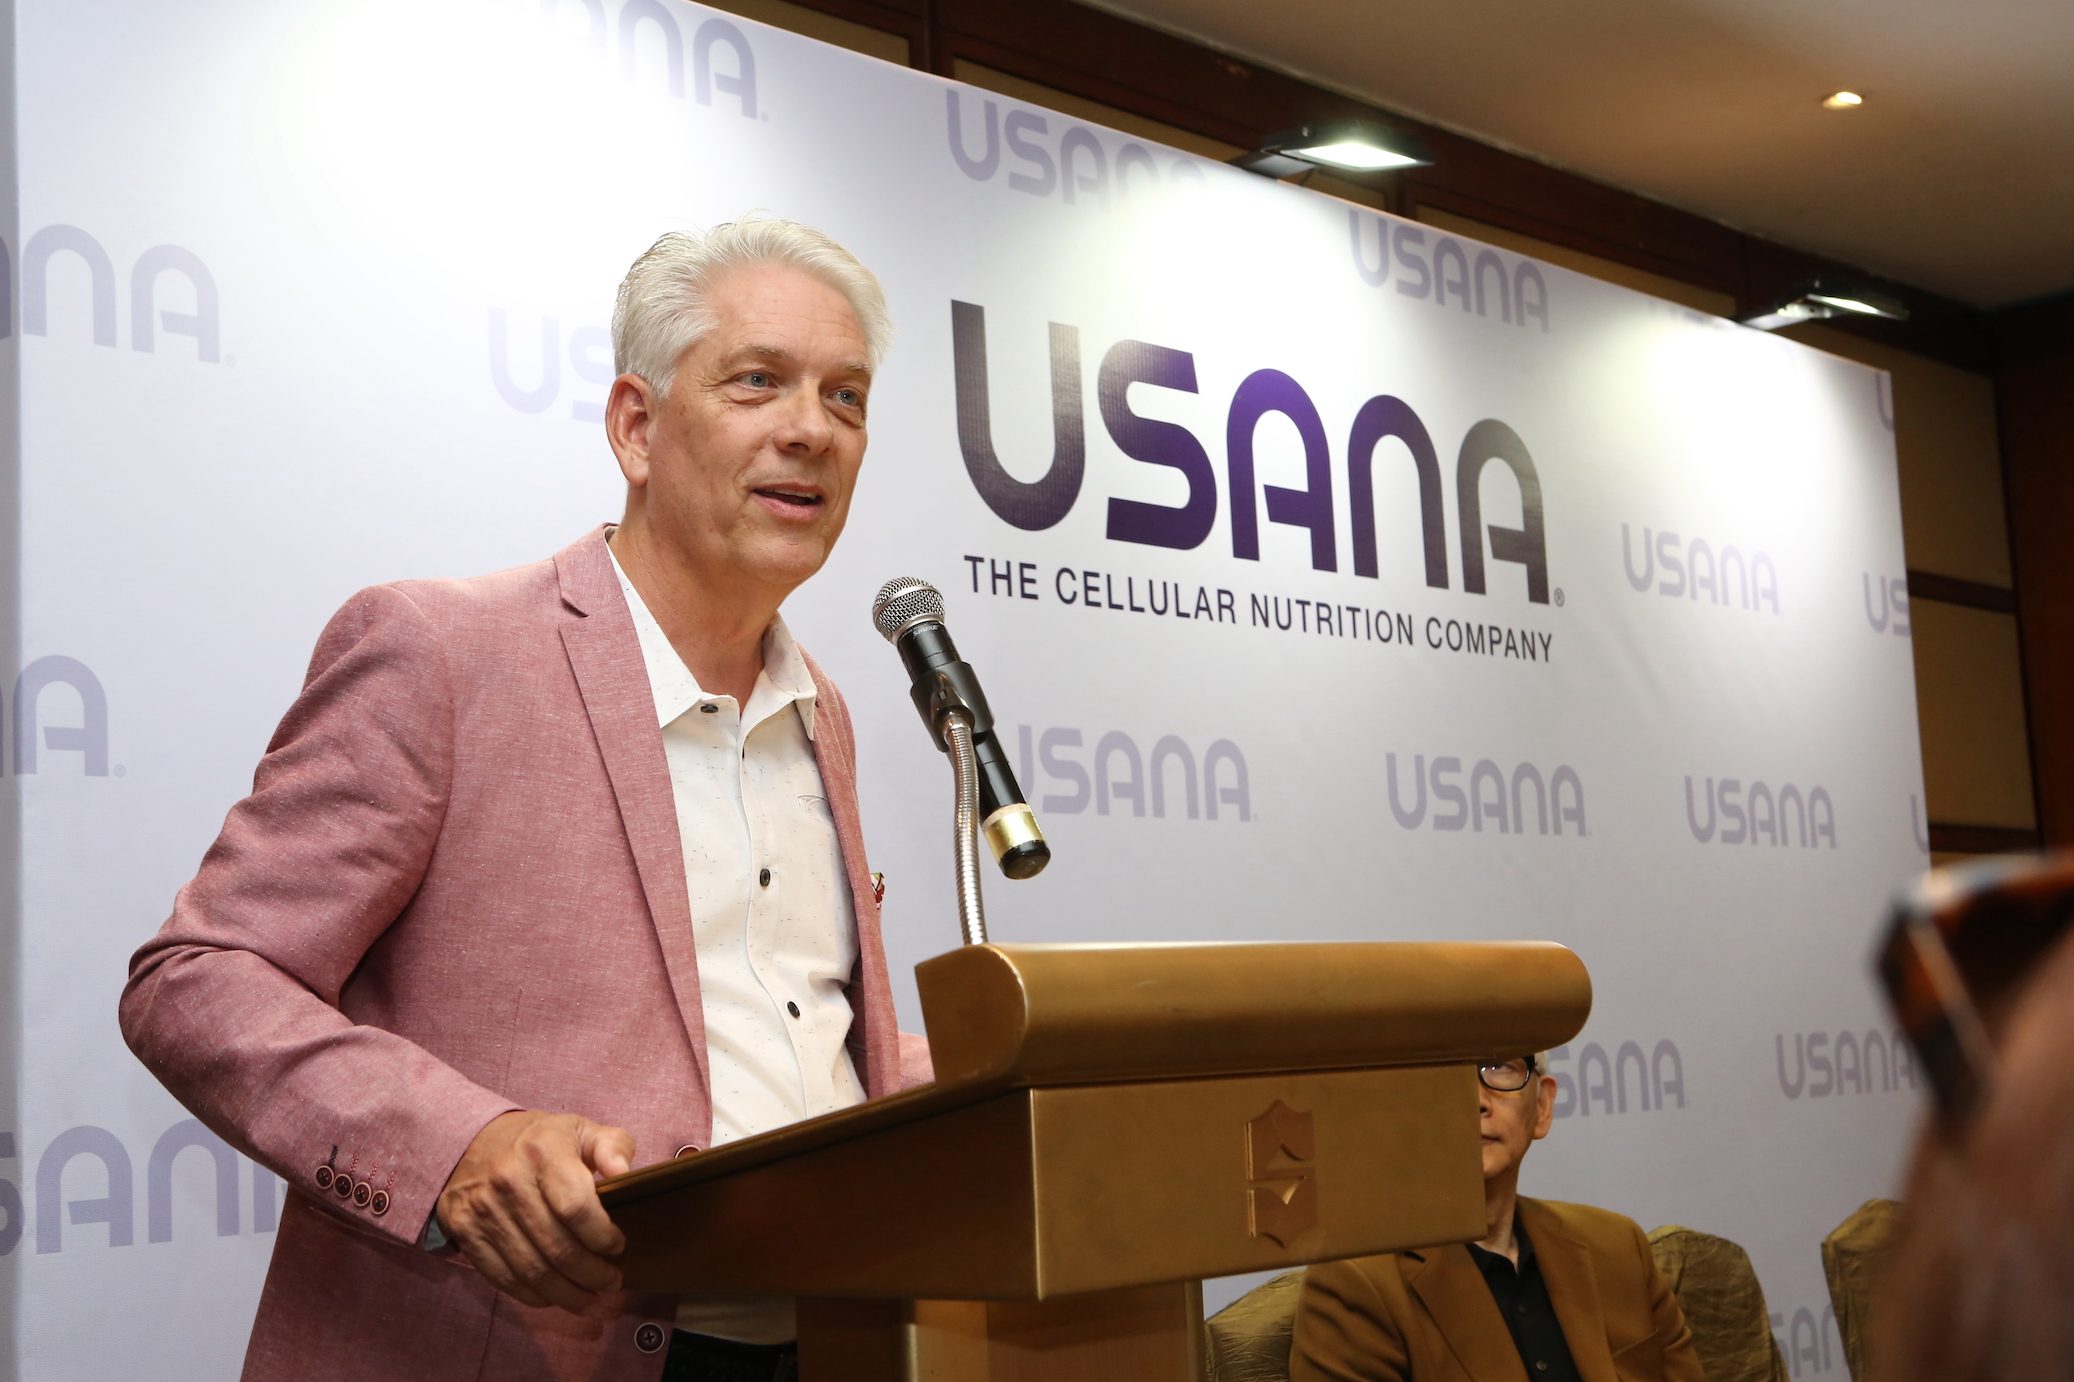 USANA Philippines and their drive towards helping 1M families attain healthy living